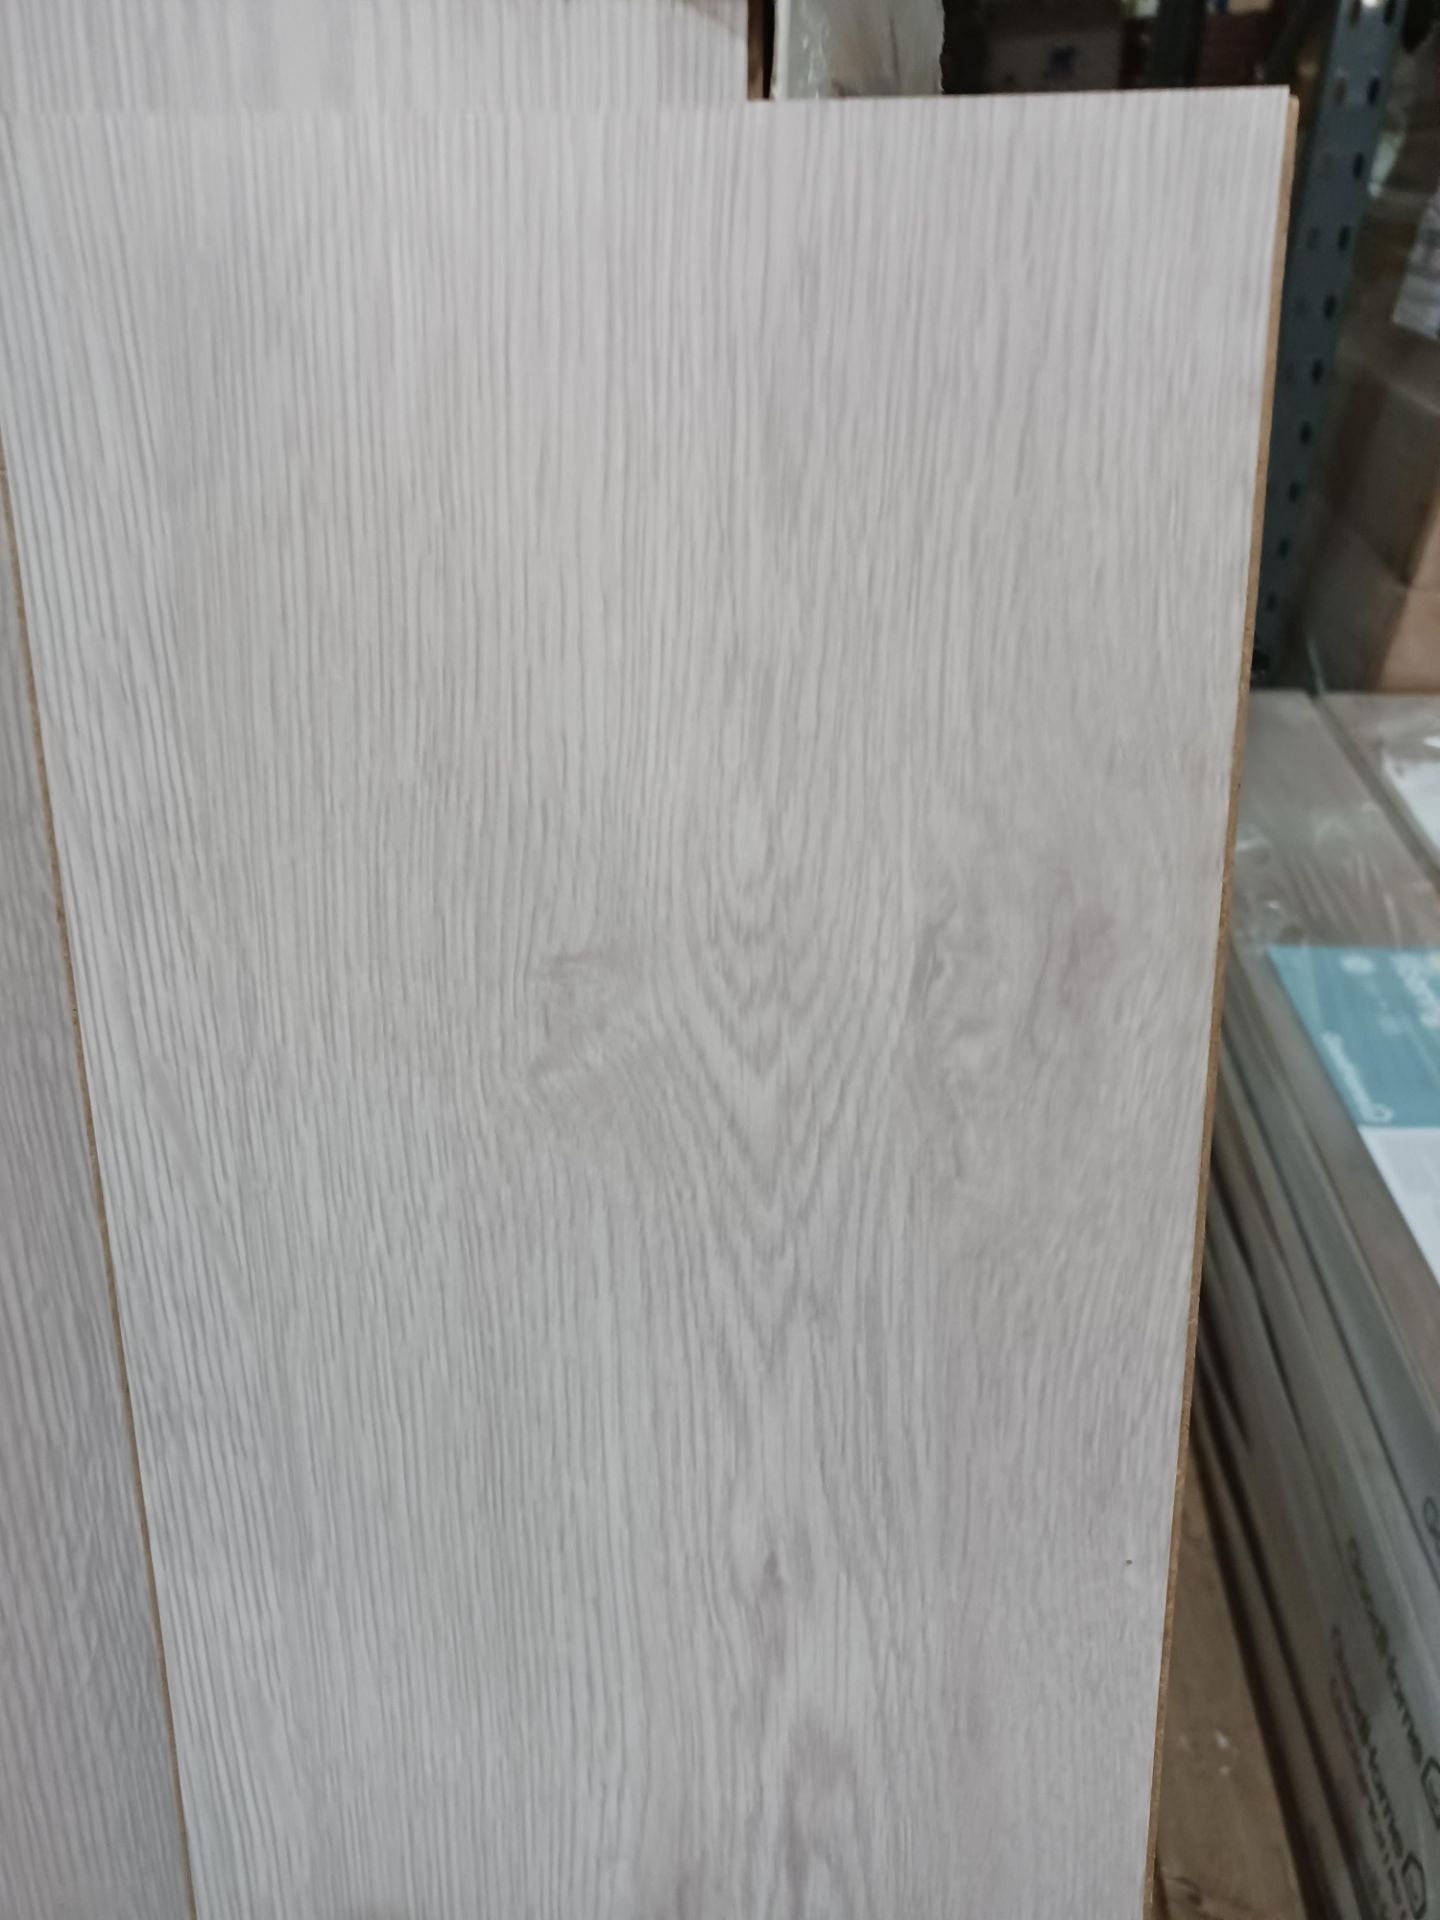 5 X PACKS OF TABOR WHITE OAK EFFECT LAMINATE FLOORING WITH INTEGRATED UNDERLAY AND ADVANCED DROP - Image 2 of 2